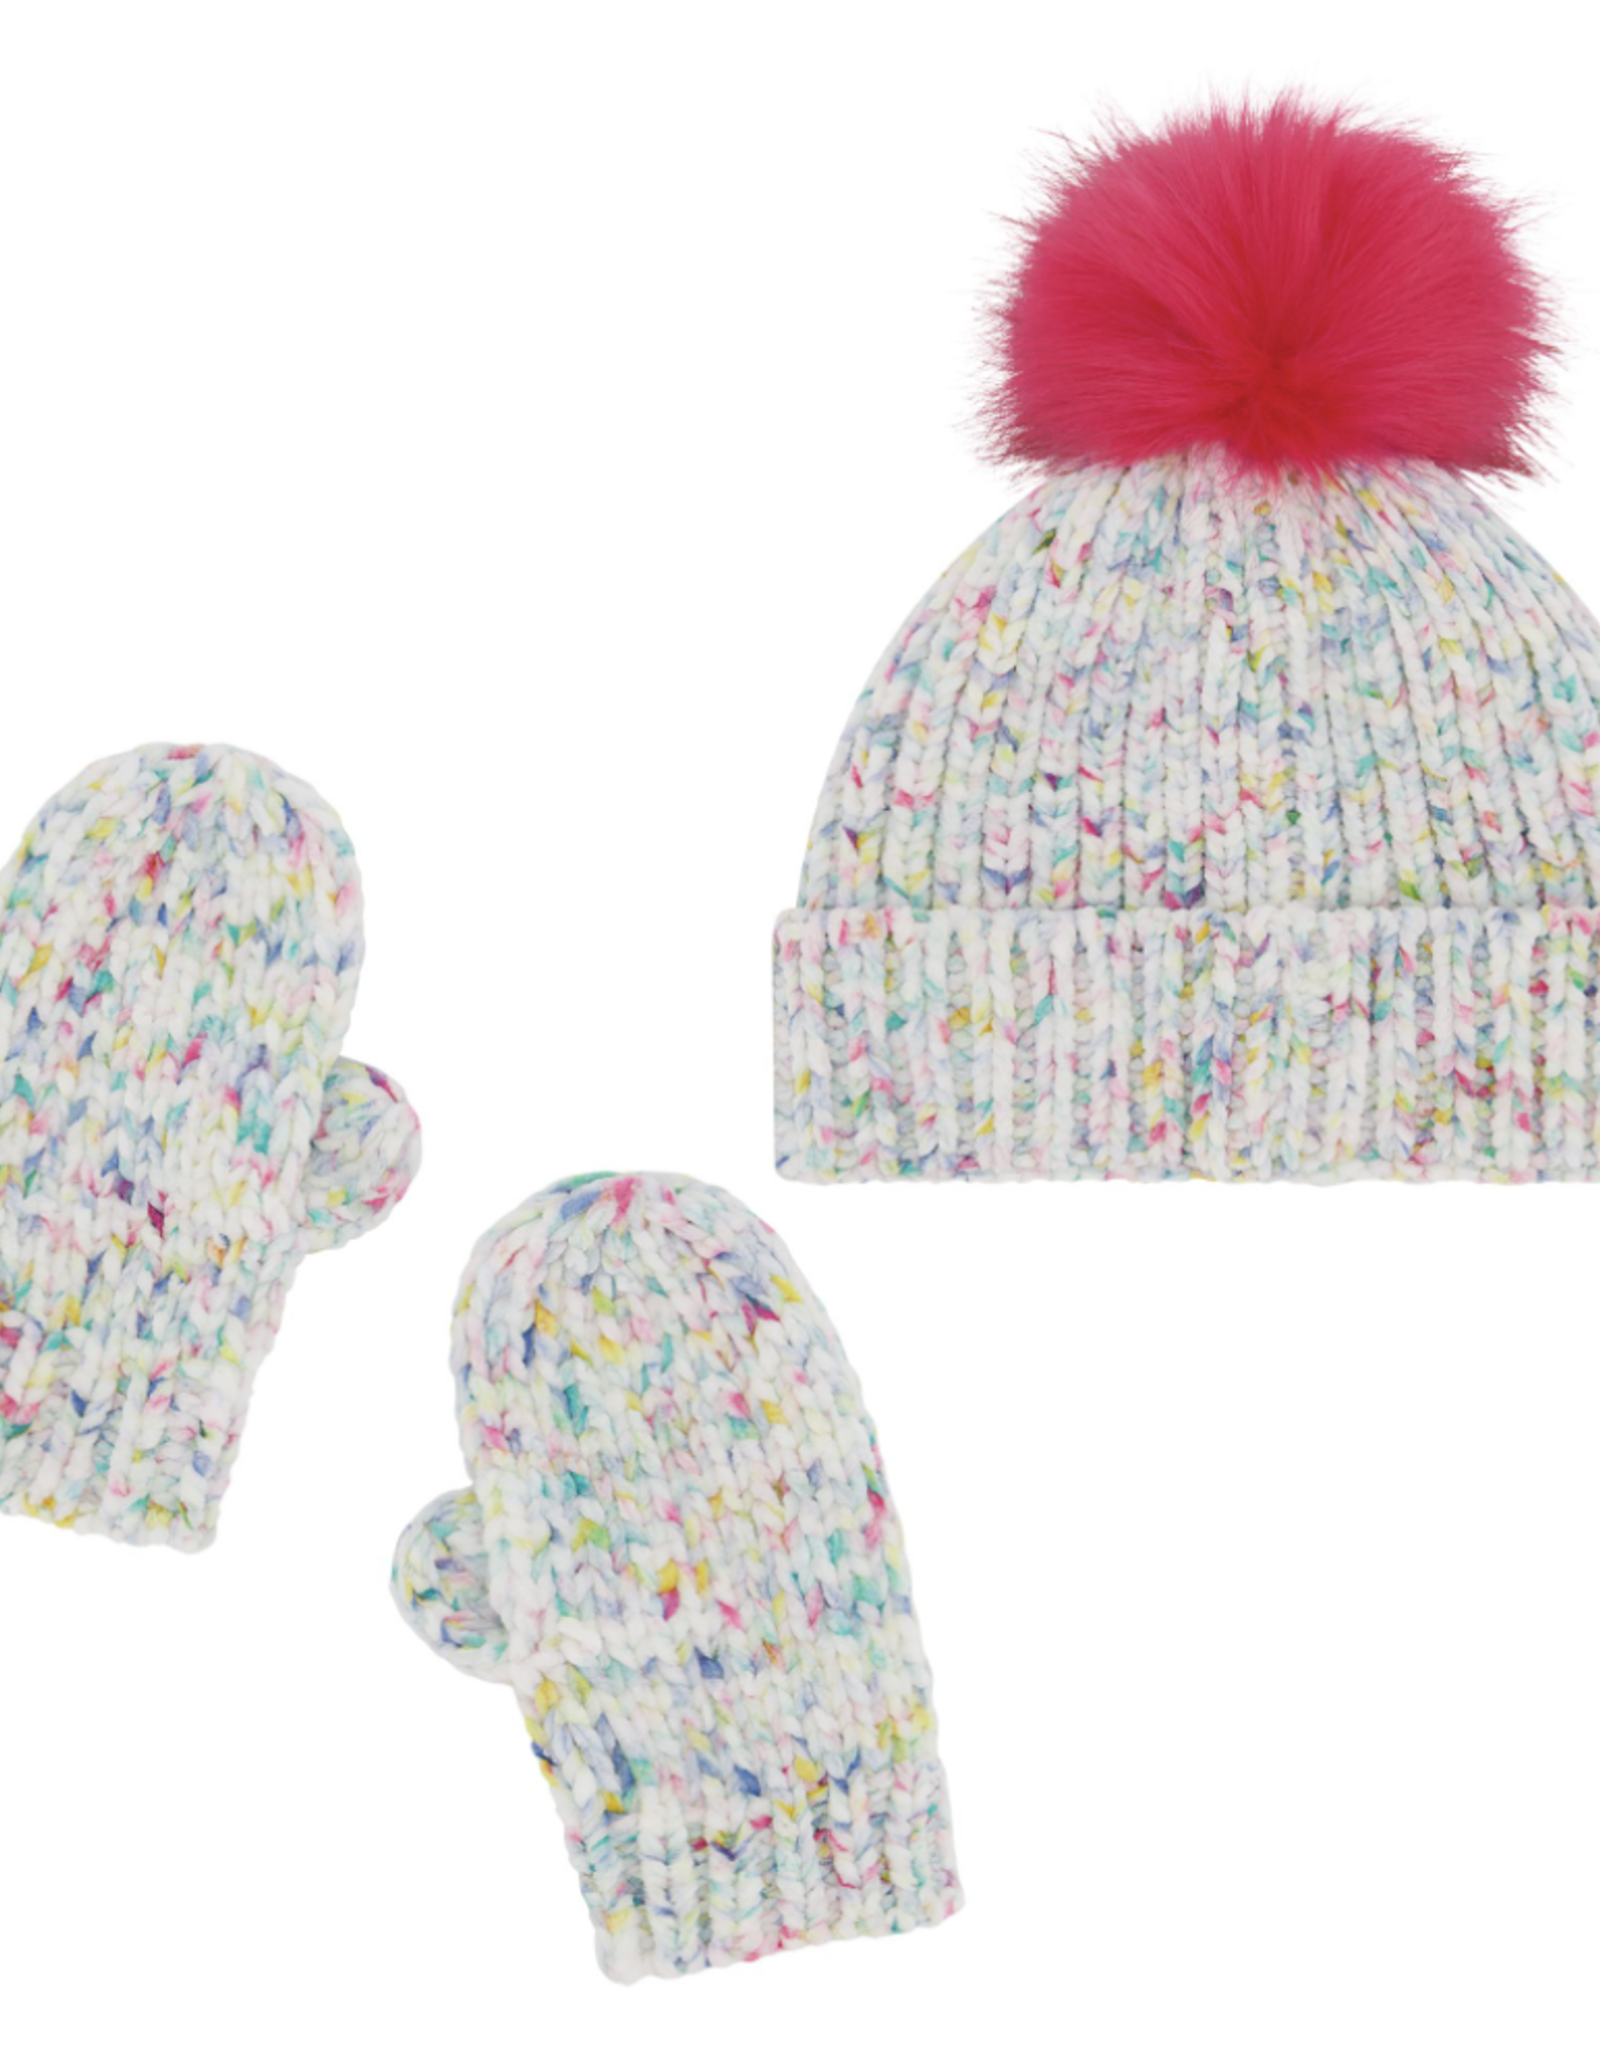 Andy & Evan White Confetti Hat and Mitten Set, size 2-4